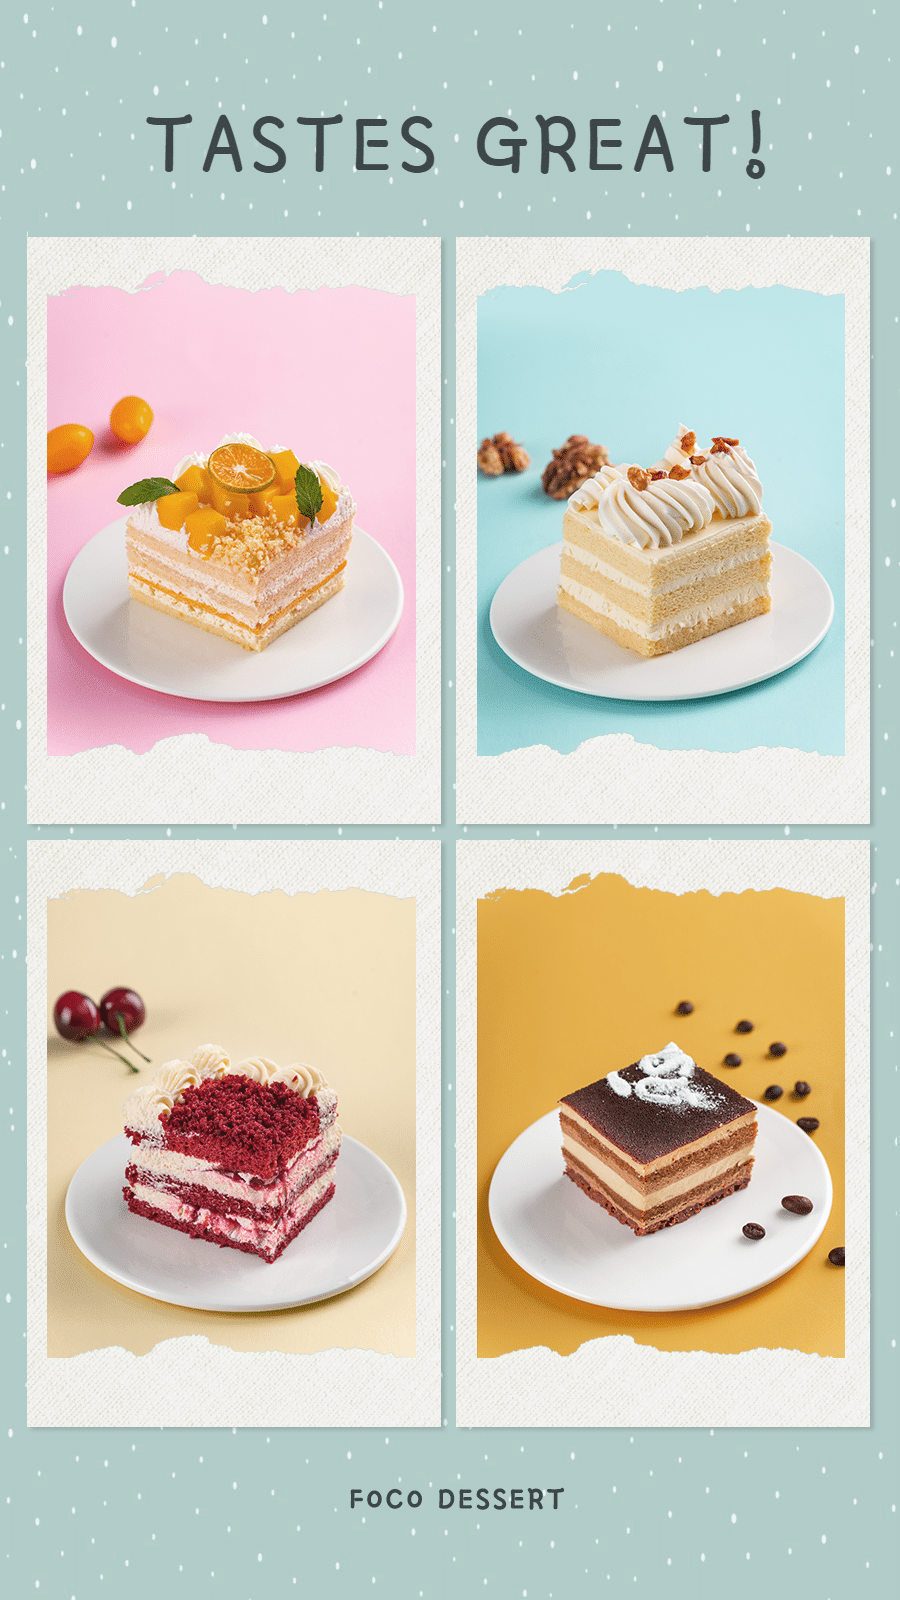 Delicious Food Bakery Dessert Jigsaw Puzzle Promotion Fashion Simple Style Poster Ecommerce Story预览效果